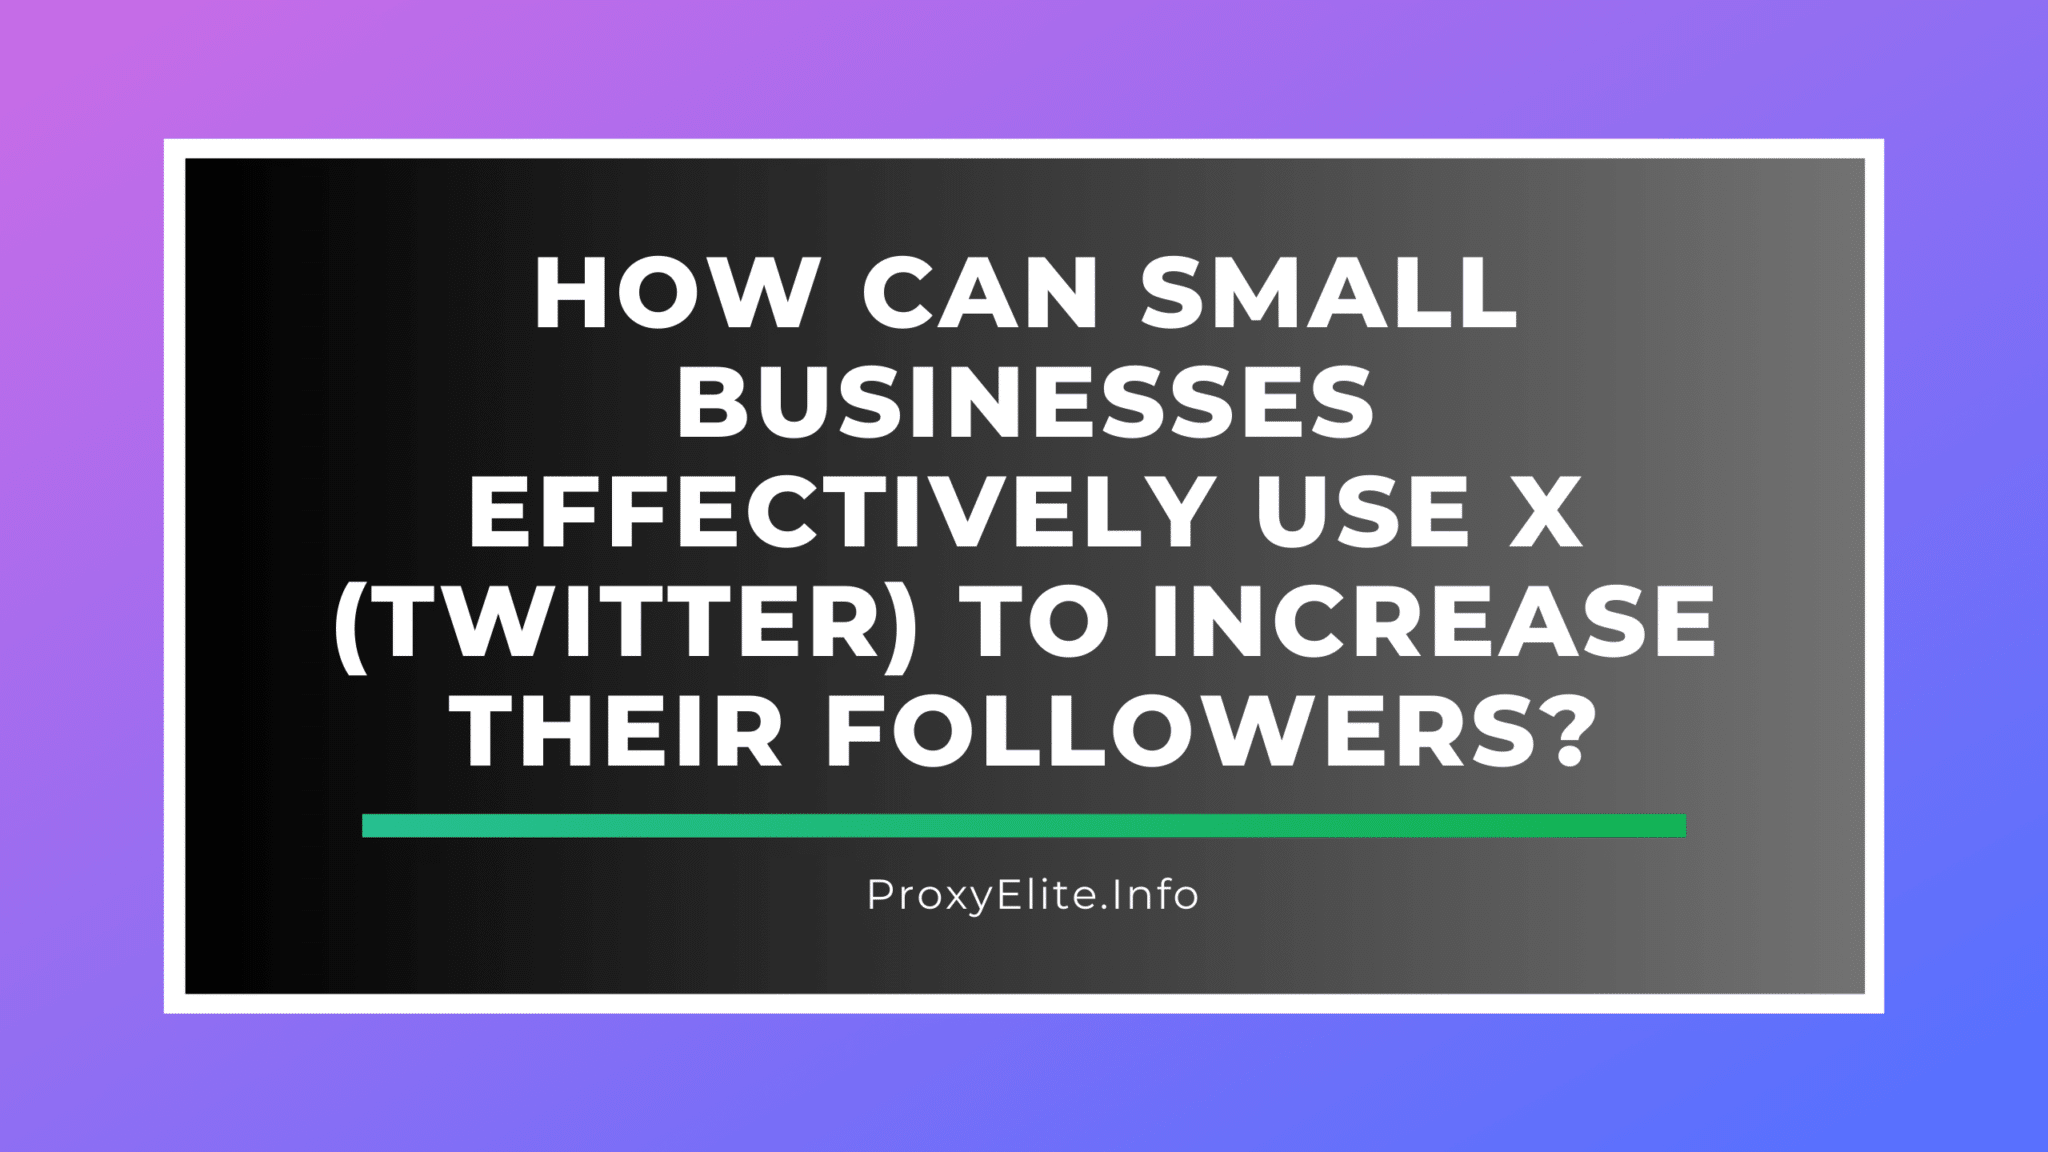 How can small businesses effectively use X (Twitter) to increase their followers?